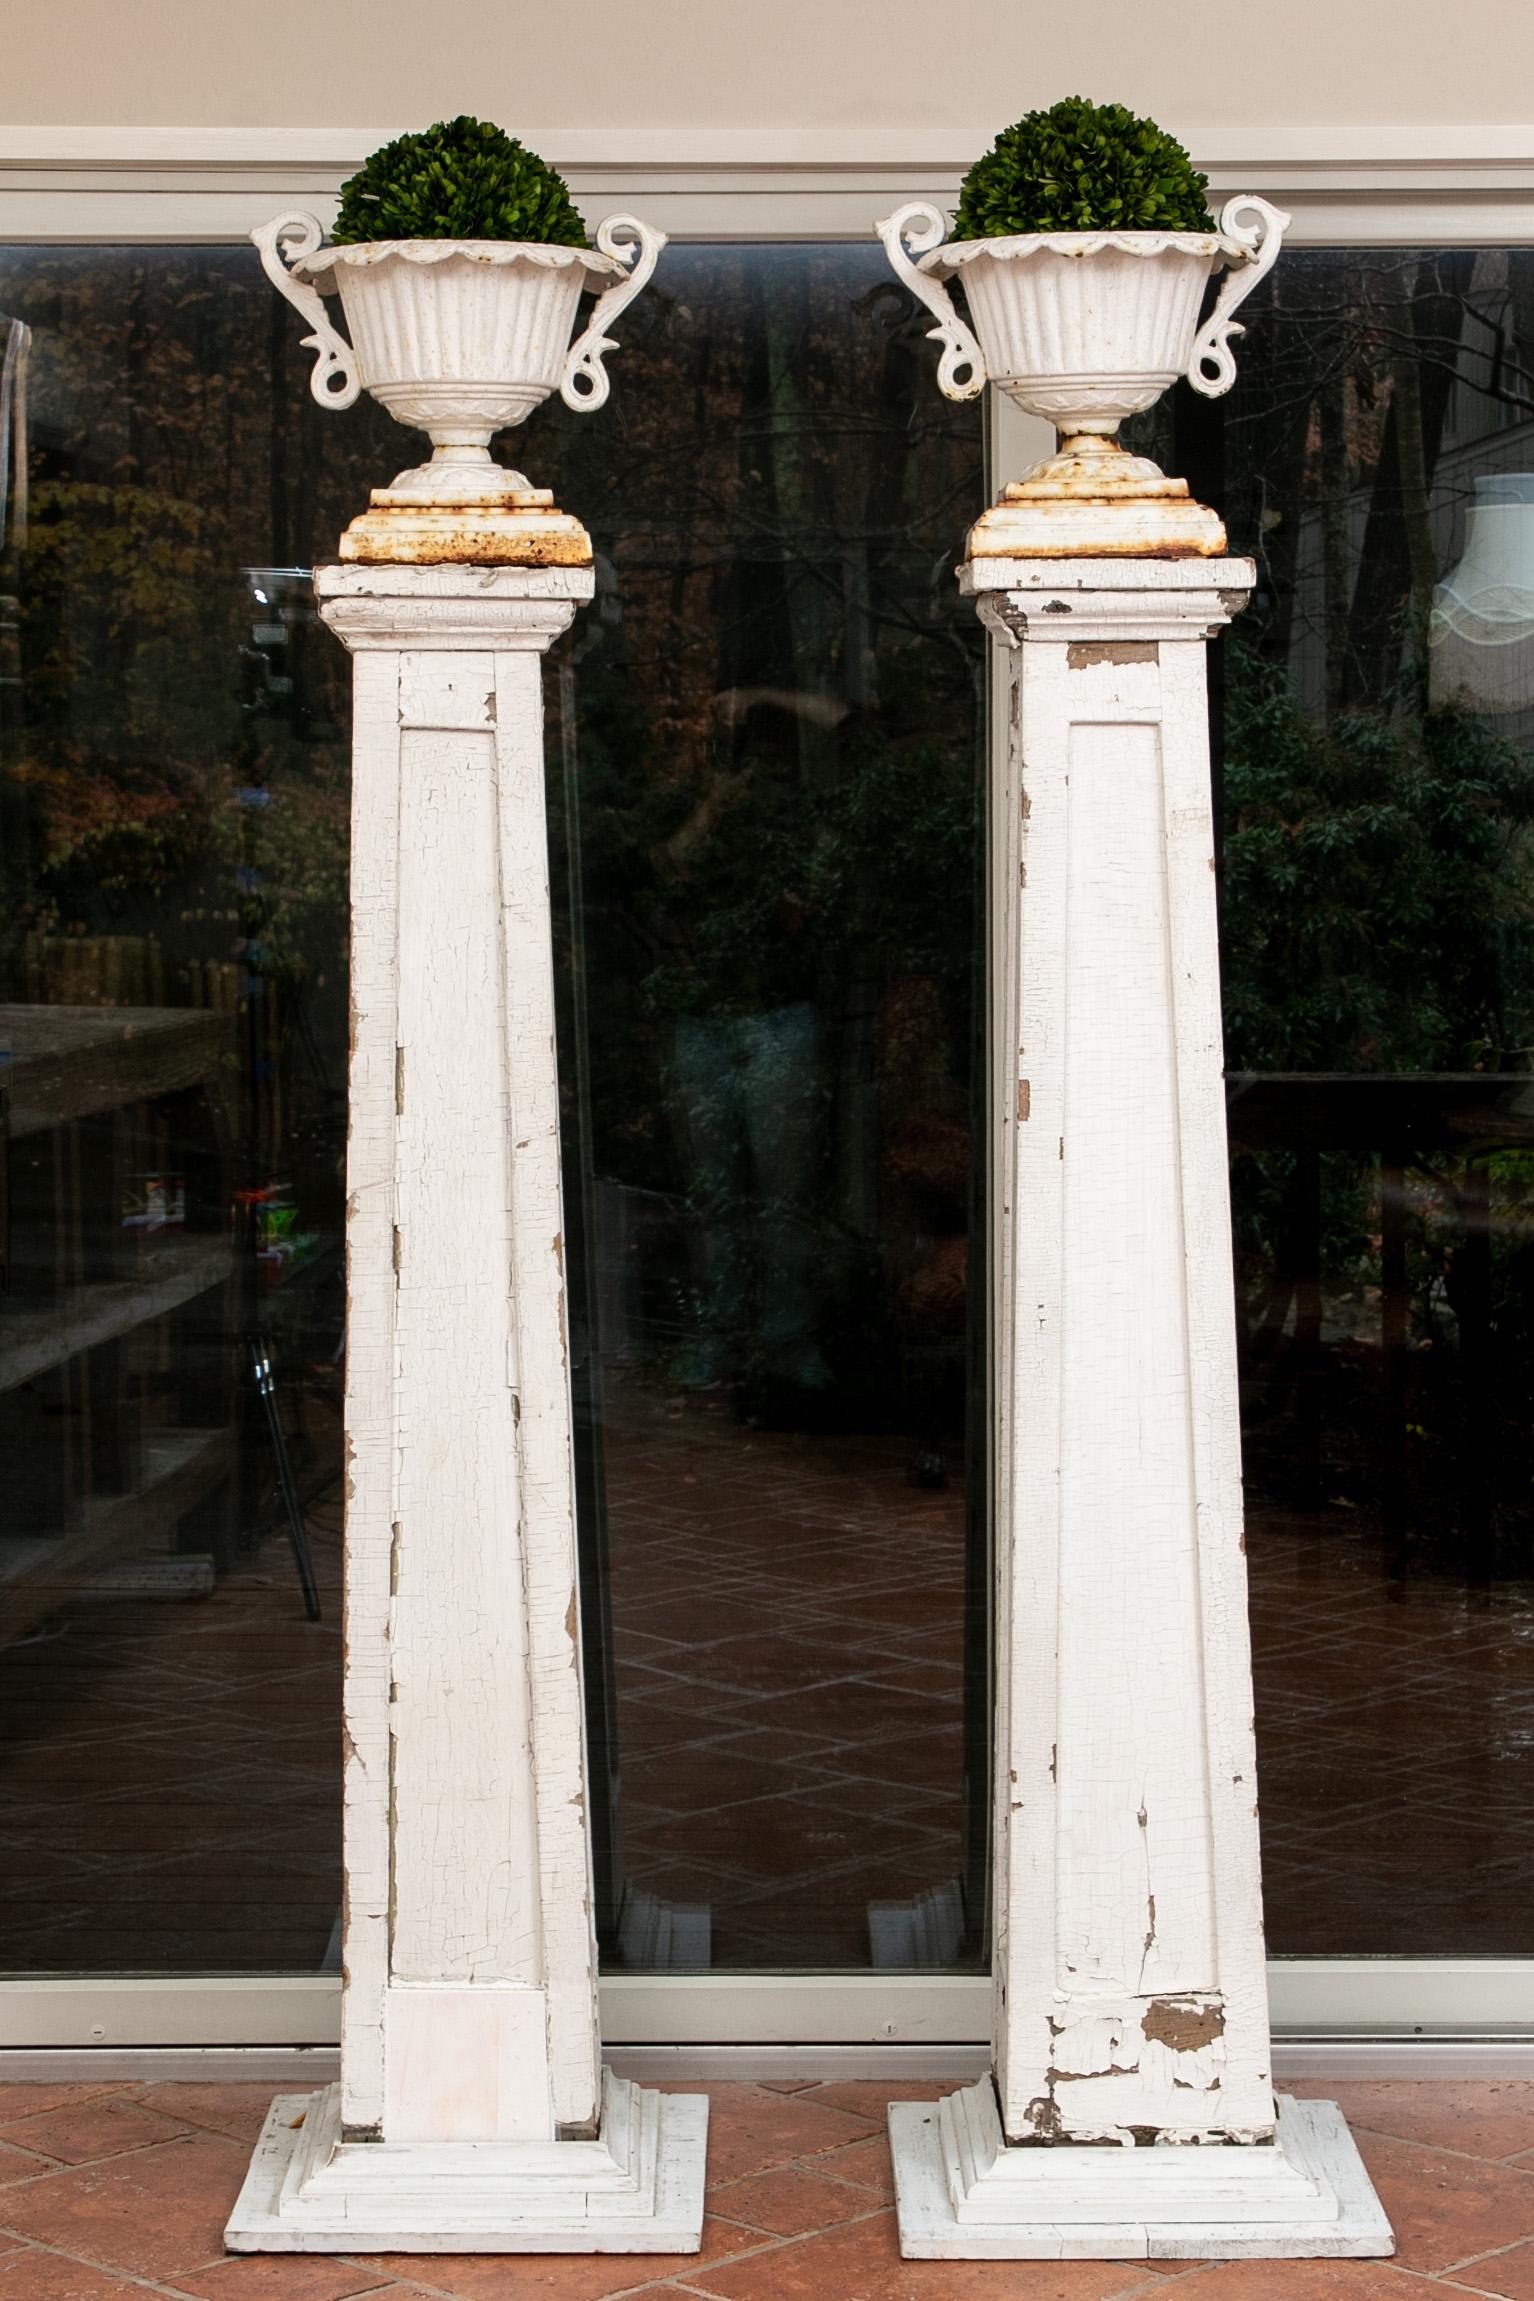 Antique pair of entrance pilasters with urns holding boxwood, carved, square tapering white painted pilasters with recessed panels are mounted on tiered bases. The tops surmounted with white painted iron twin handled urns with scalloped rims.